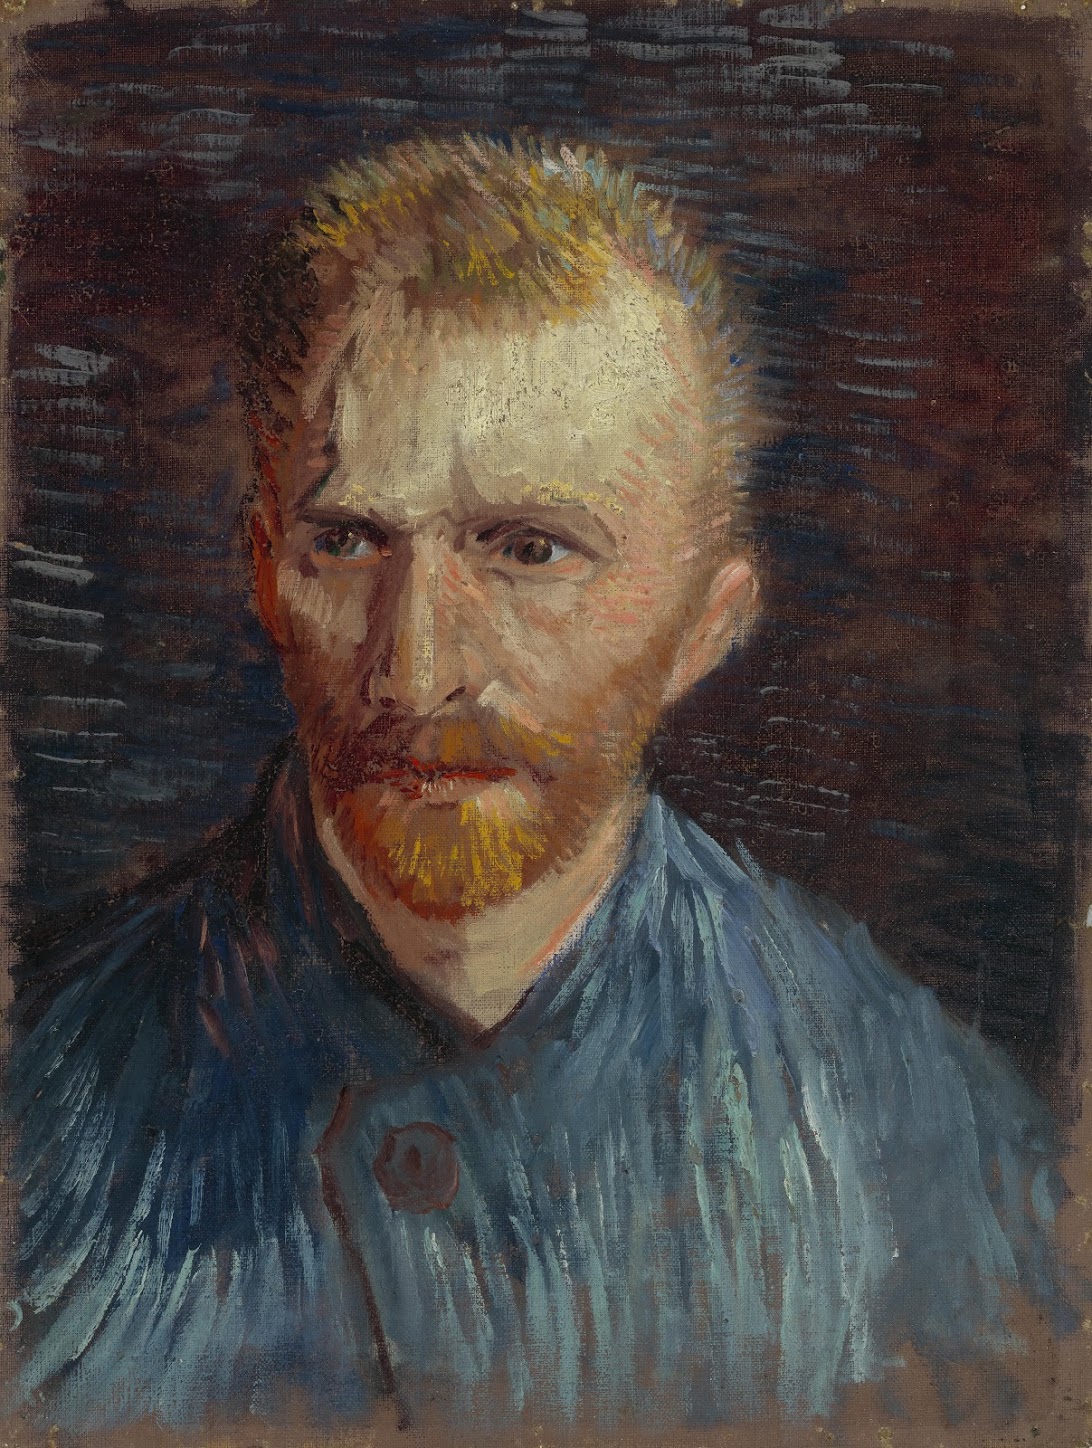 Van Gogh, searching for God's colors